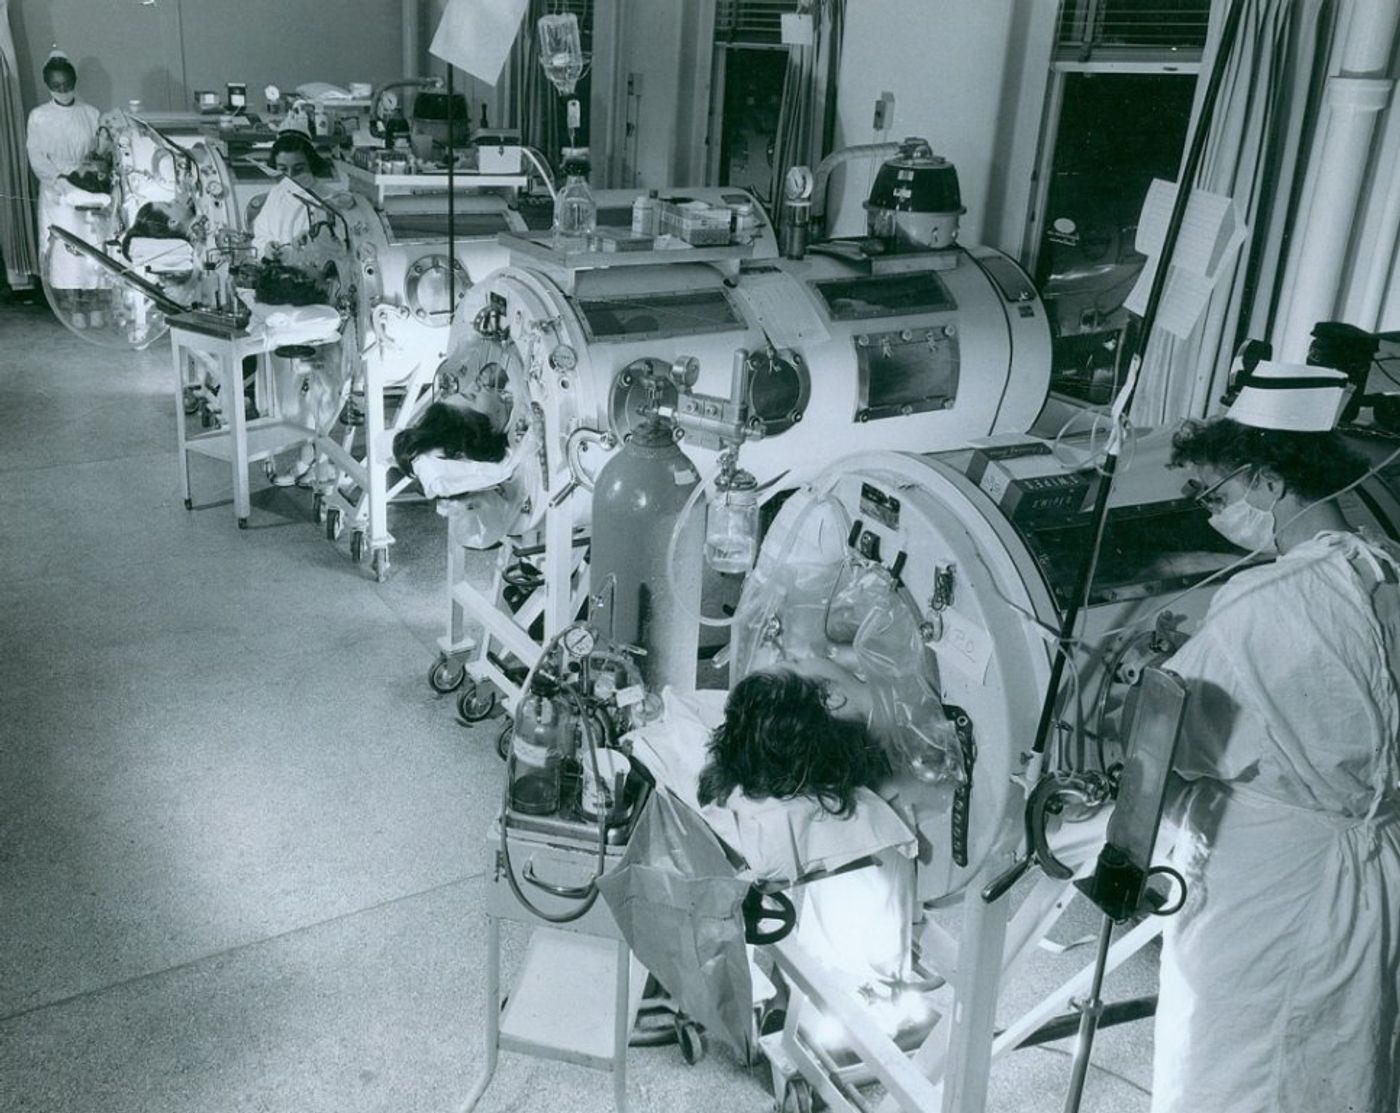 In the 1950s, the Iron Lung machines seen in this photo helped people breathe when polio virus killed their lung muscle cells